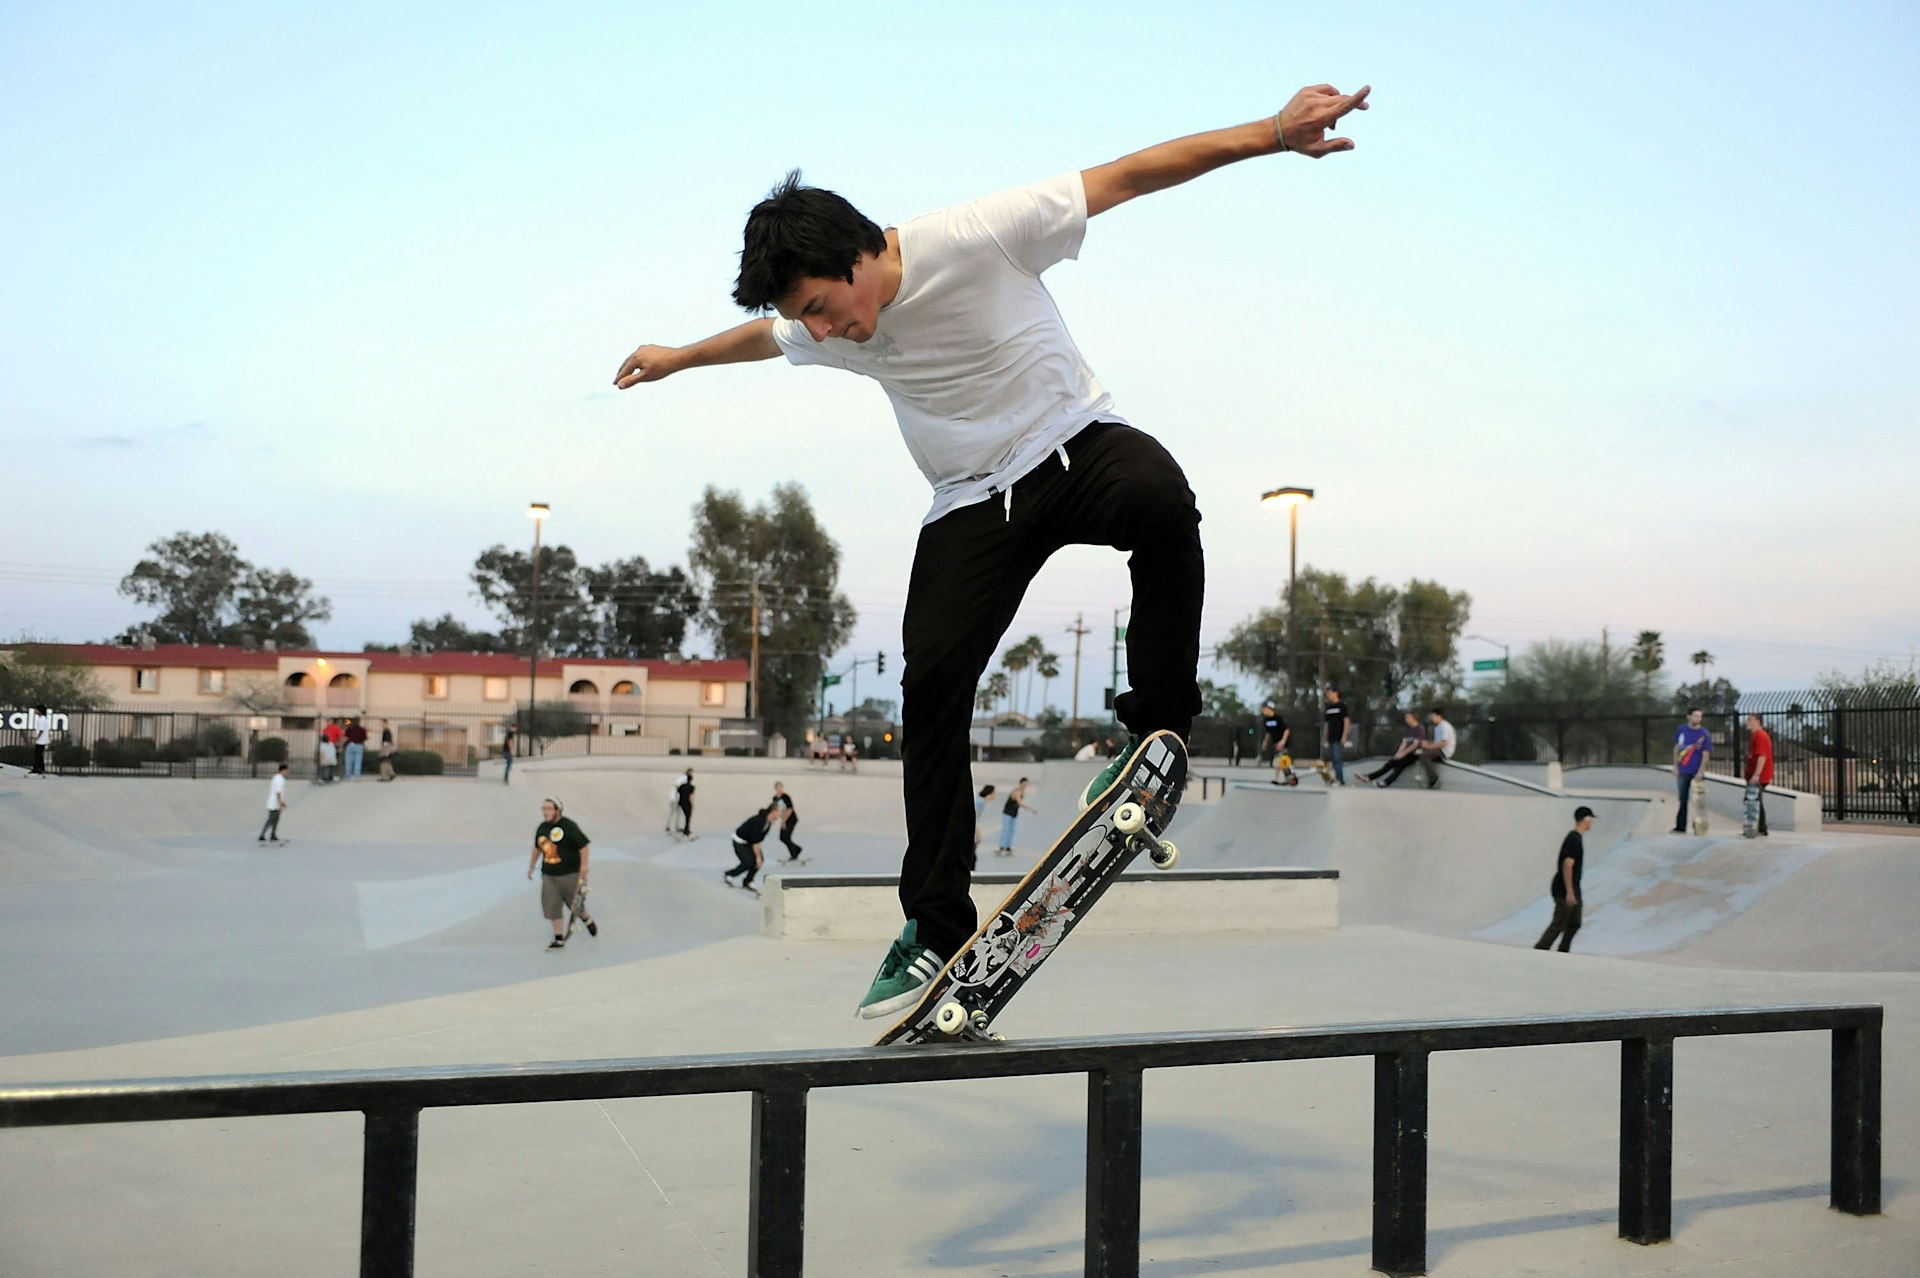 A skateboarder slides his board across a rail at Paradise Valley Skate Park